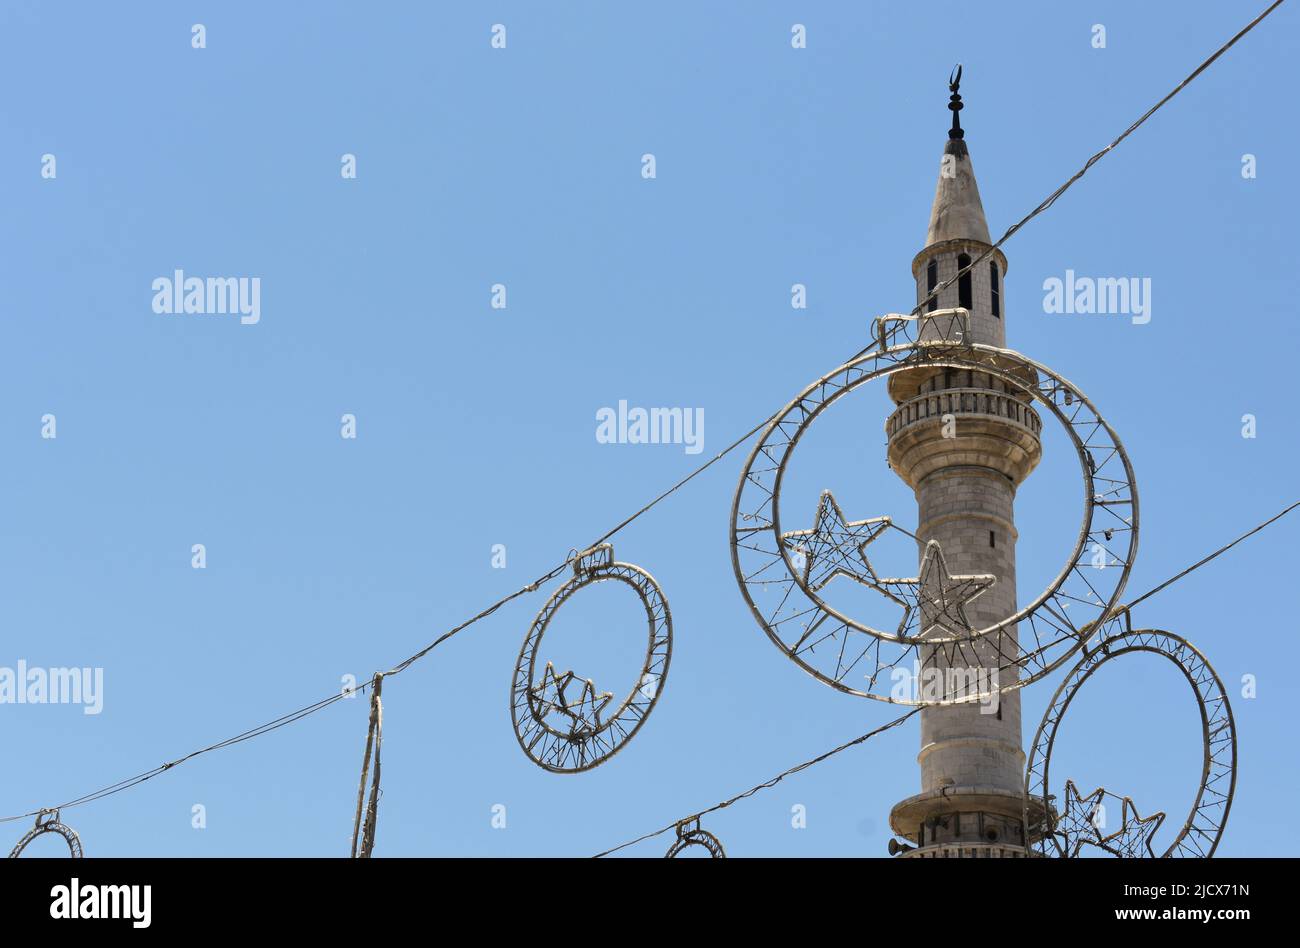 Ramadan decorations hanging in the street at Eid in front of a mosque minaret in Madaba in Jordan Stock Photo